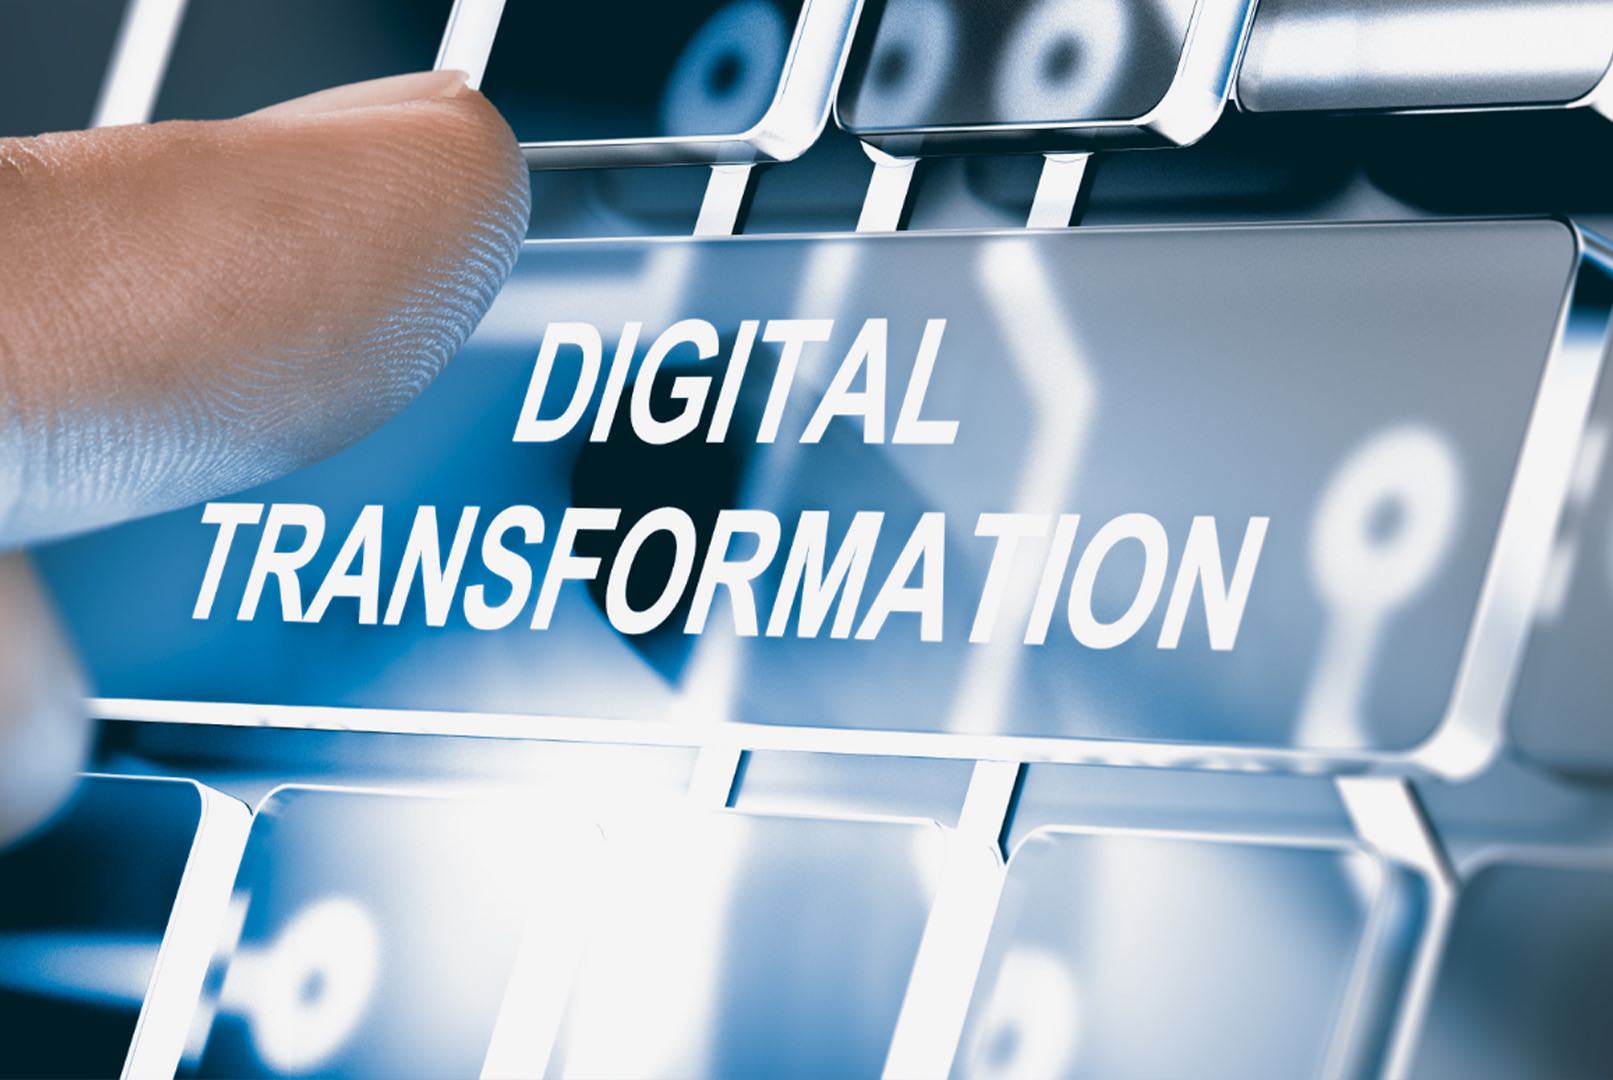 finger on keyboard button that says digital transformation